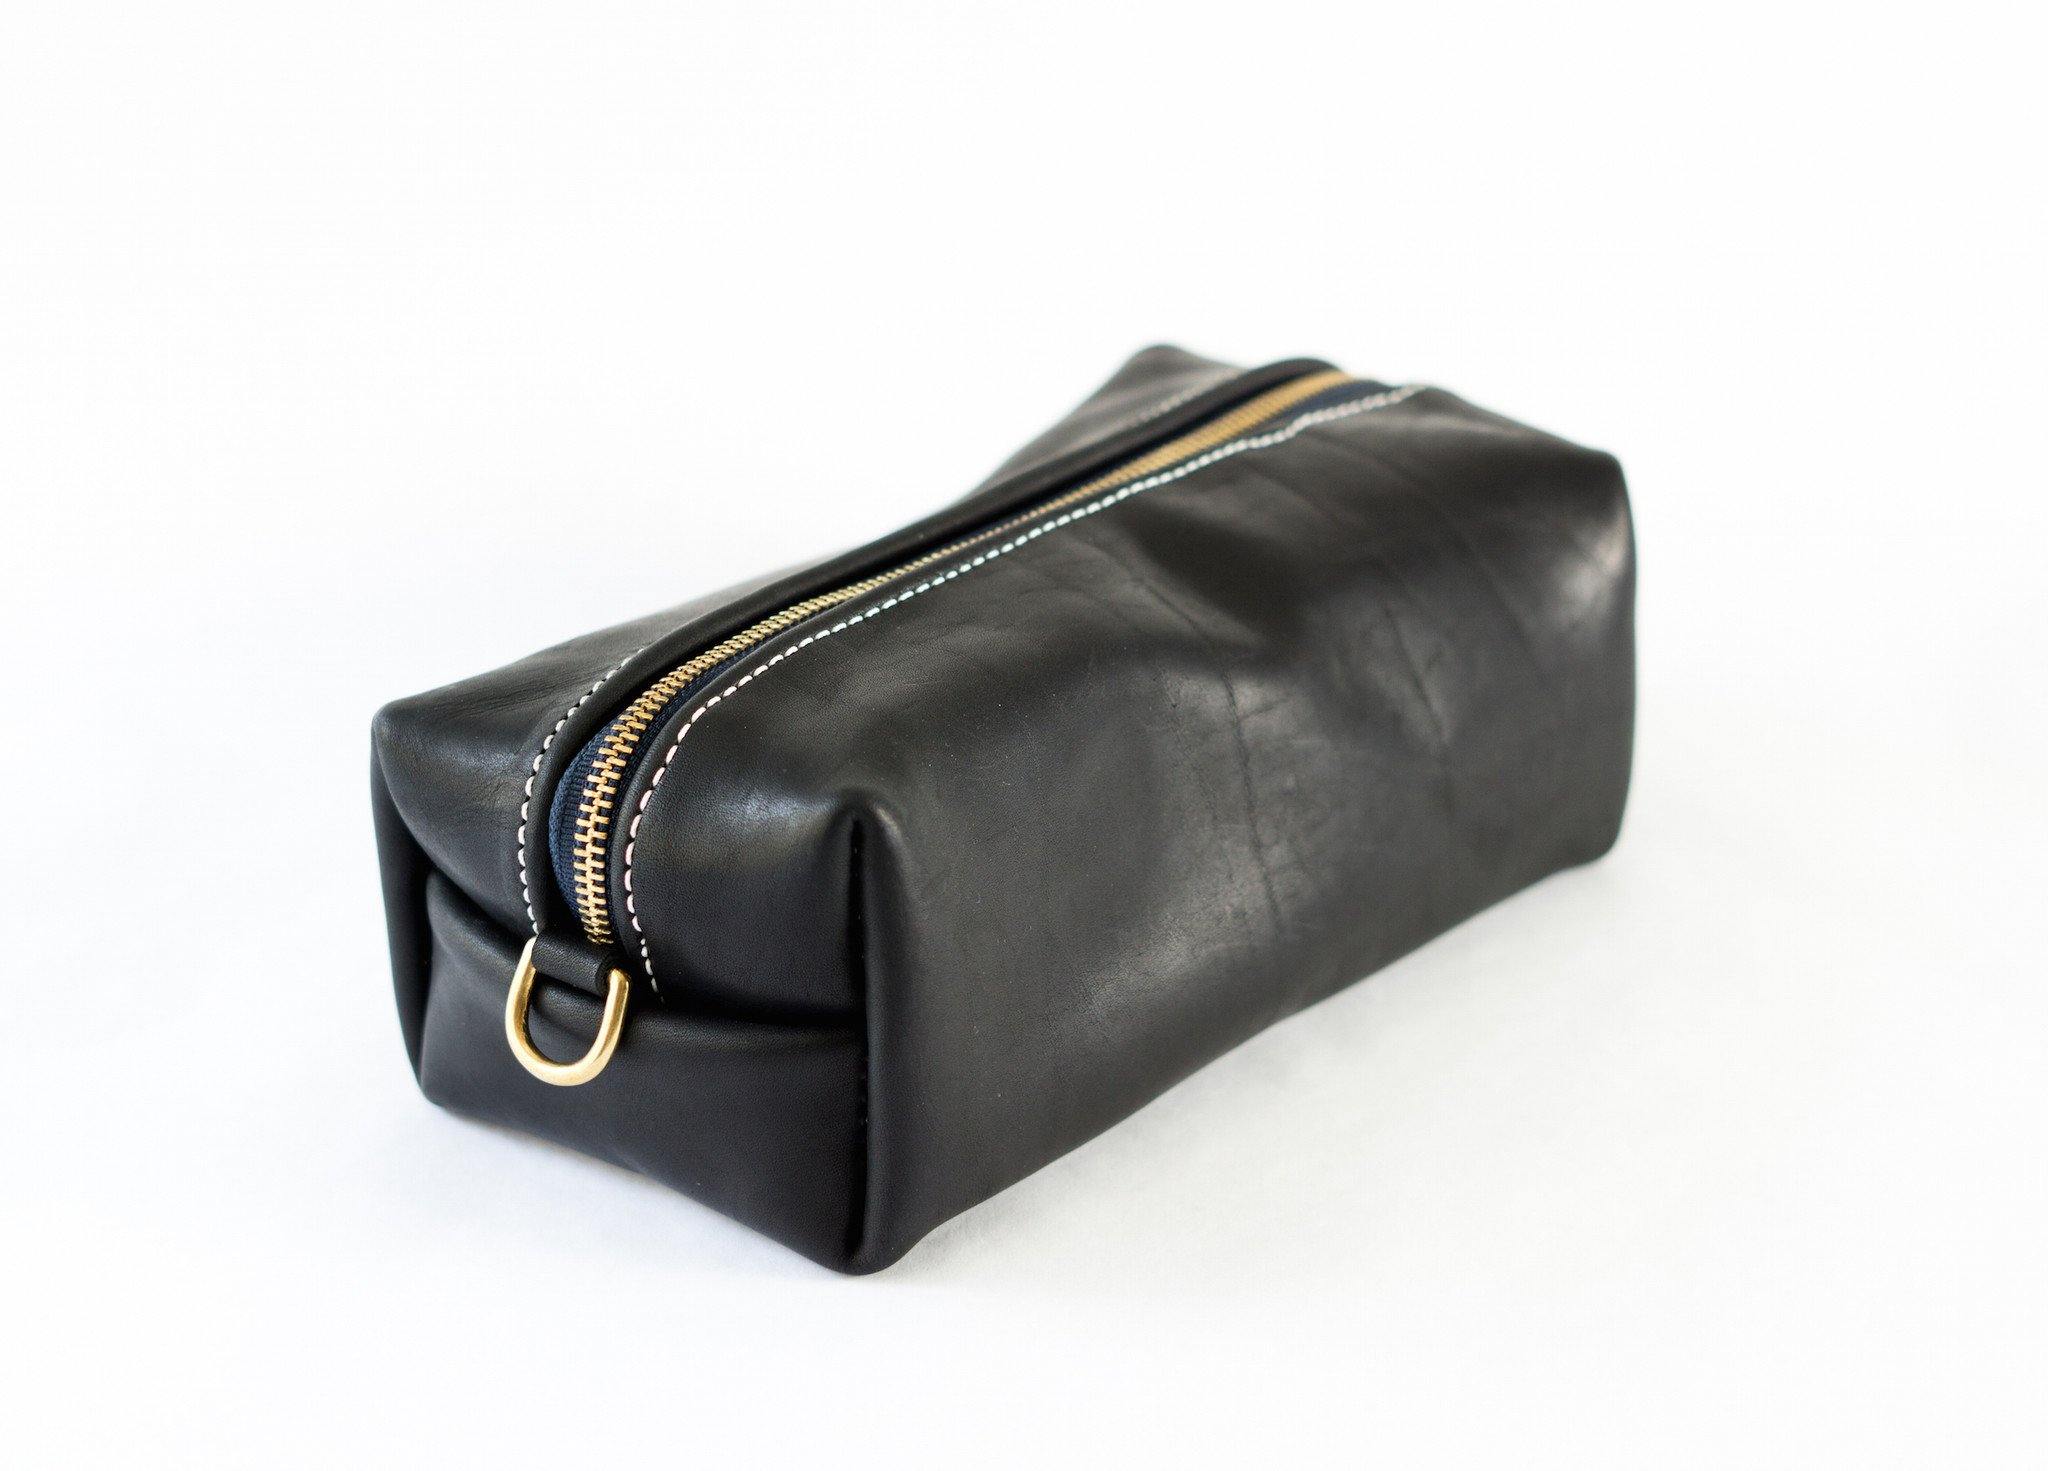 Horween Leather Dopp Kit in Black Dublin by Sturdy Brothers